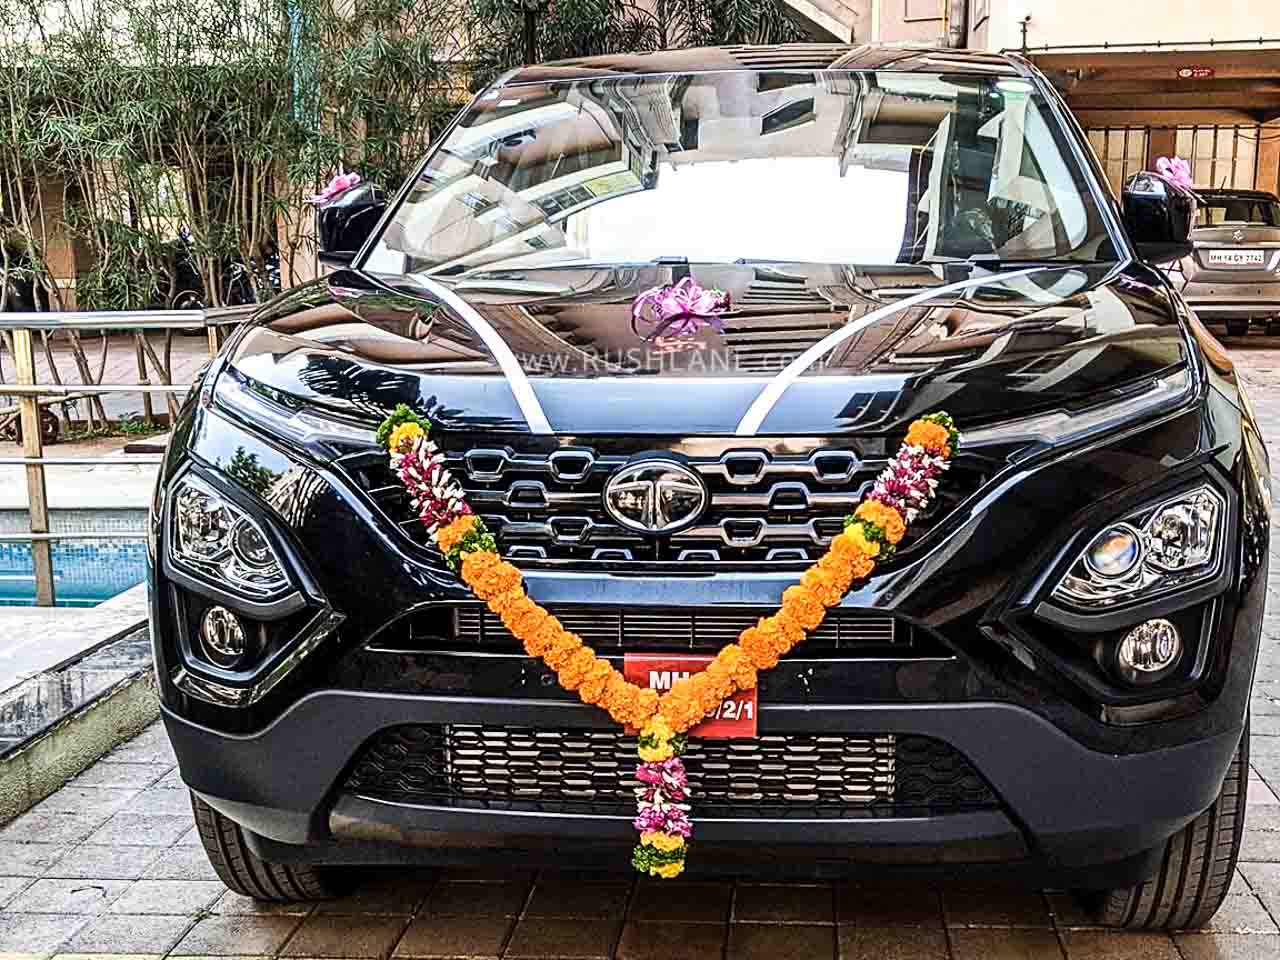 Tata Harrier Prices Increased By 45k 2020 Vs 2019 Price List